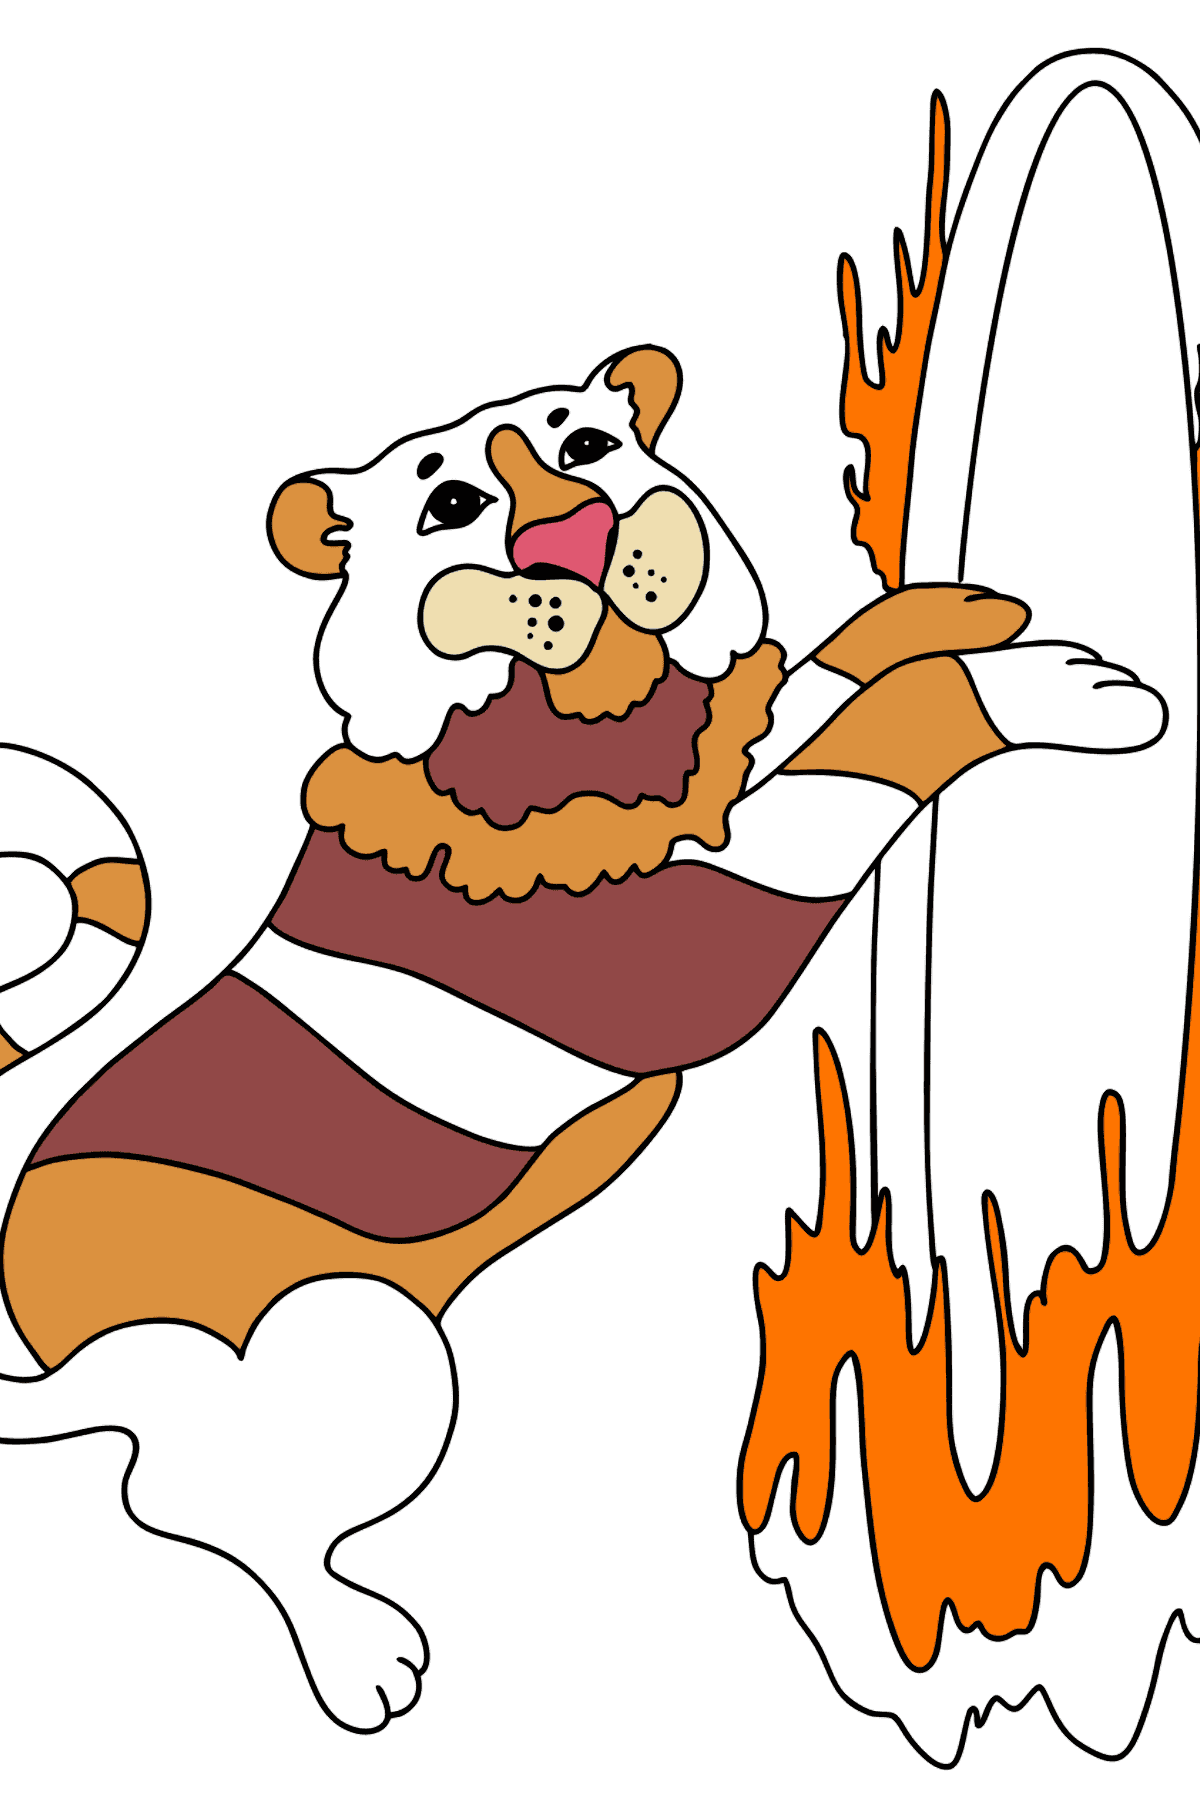 Coloring Page - A Tiger is Jumping Through Fire in a Circus - Coloring Pages for Kids